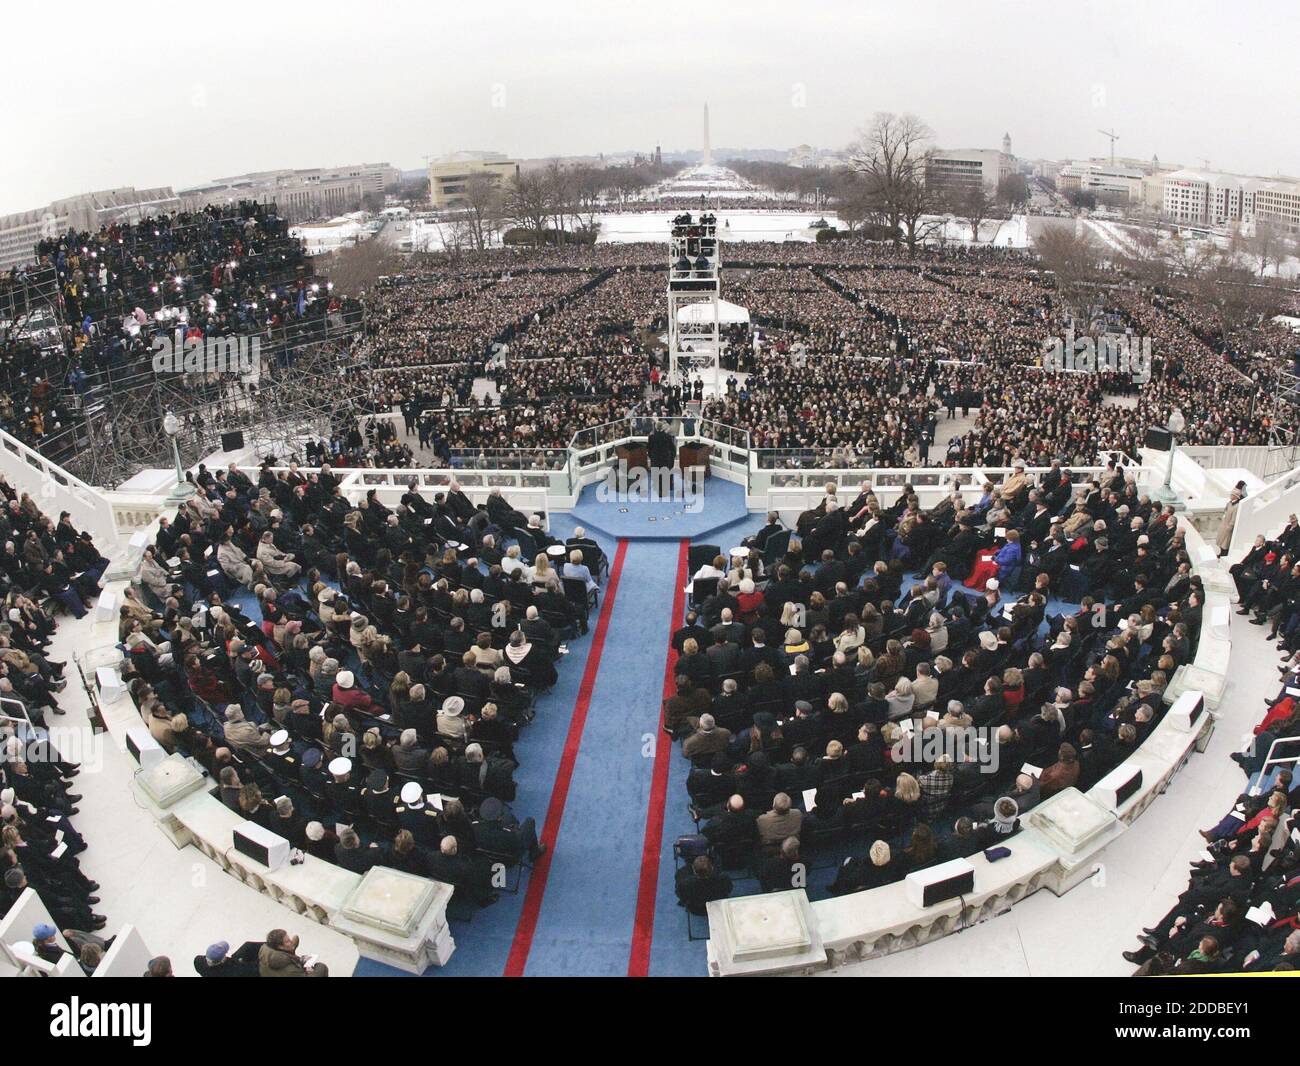 NO FILM, NO VIDEO, NO TV, NO DOCUMENTARY - U.S. President George W. Bush gives his Inauguration Day speech, during the presidential Inauguration ceremony on the steps of the U.S. Capitol, in Washington, DC, USA, on January 20, 2005. Photo by Chuck Kennedy/US News Story Slugged/KRT/ABACA. Stock Photo